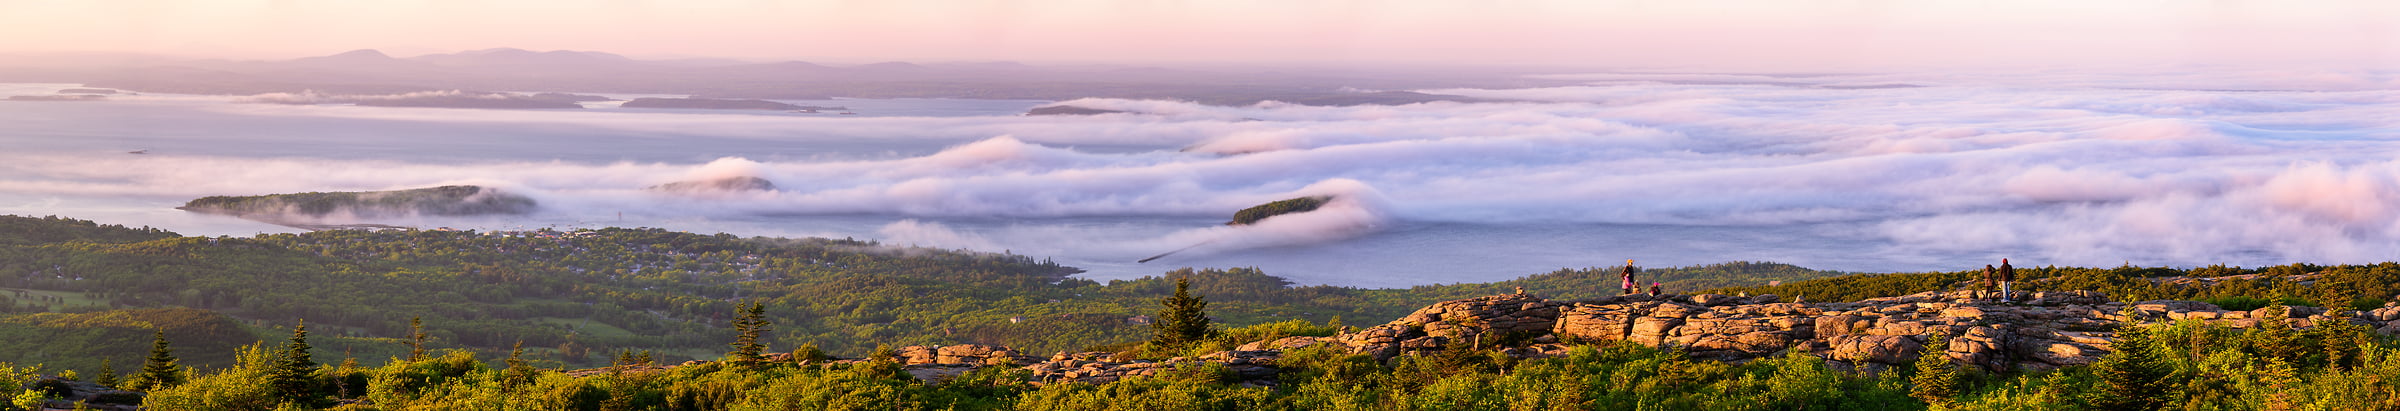 219 megapixels! A very high resolution, large-format VAST photo of fog covering Bar Harbor; fine art landscape photograph created by Aaron Priest from Cadillac Mountain in Acadia National Park, Maine.